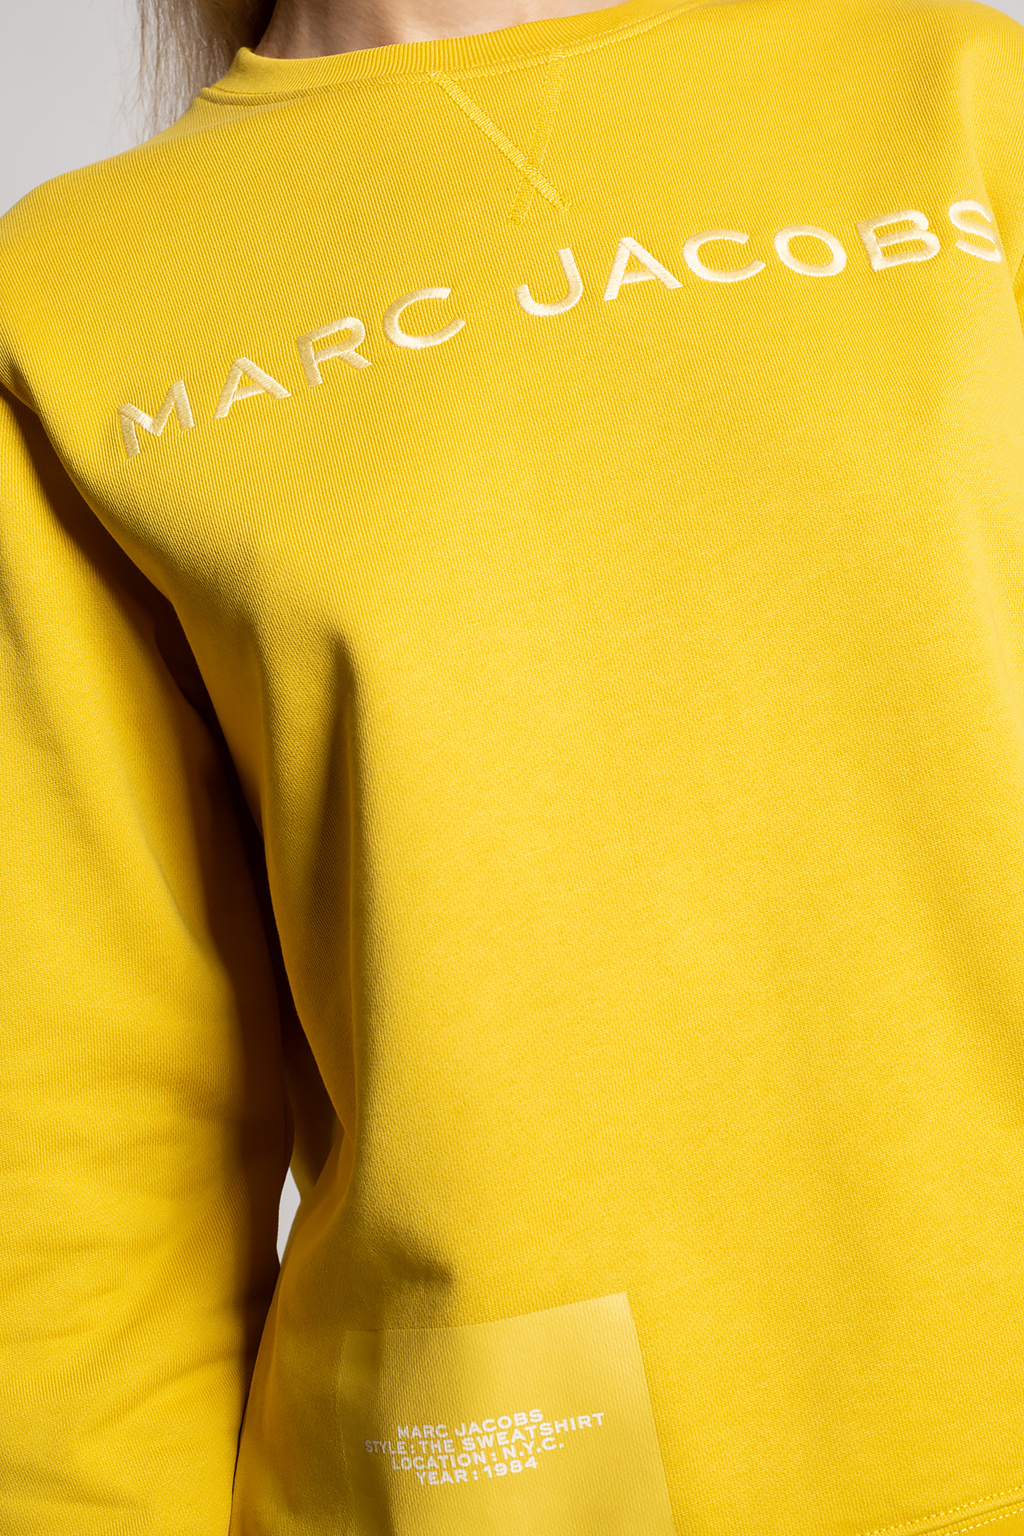 Marc Jacobs line not only look better than the Marc Jacobs line but also cost less